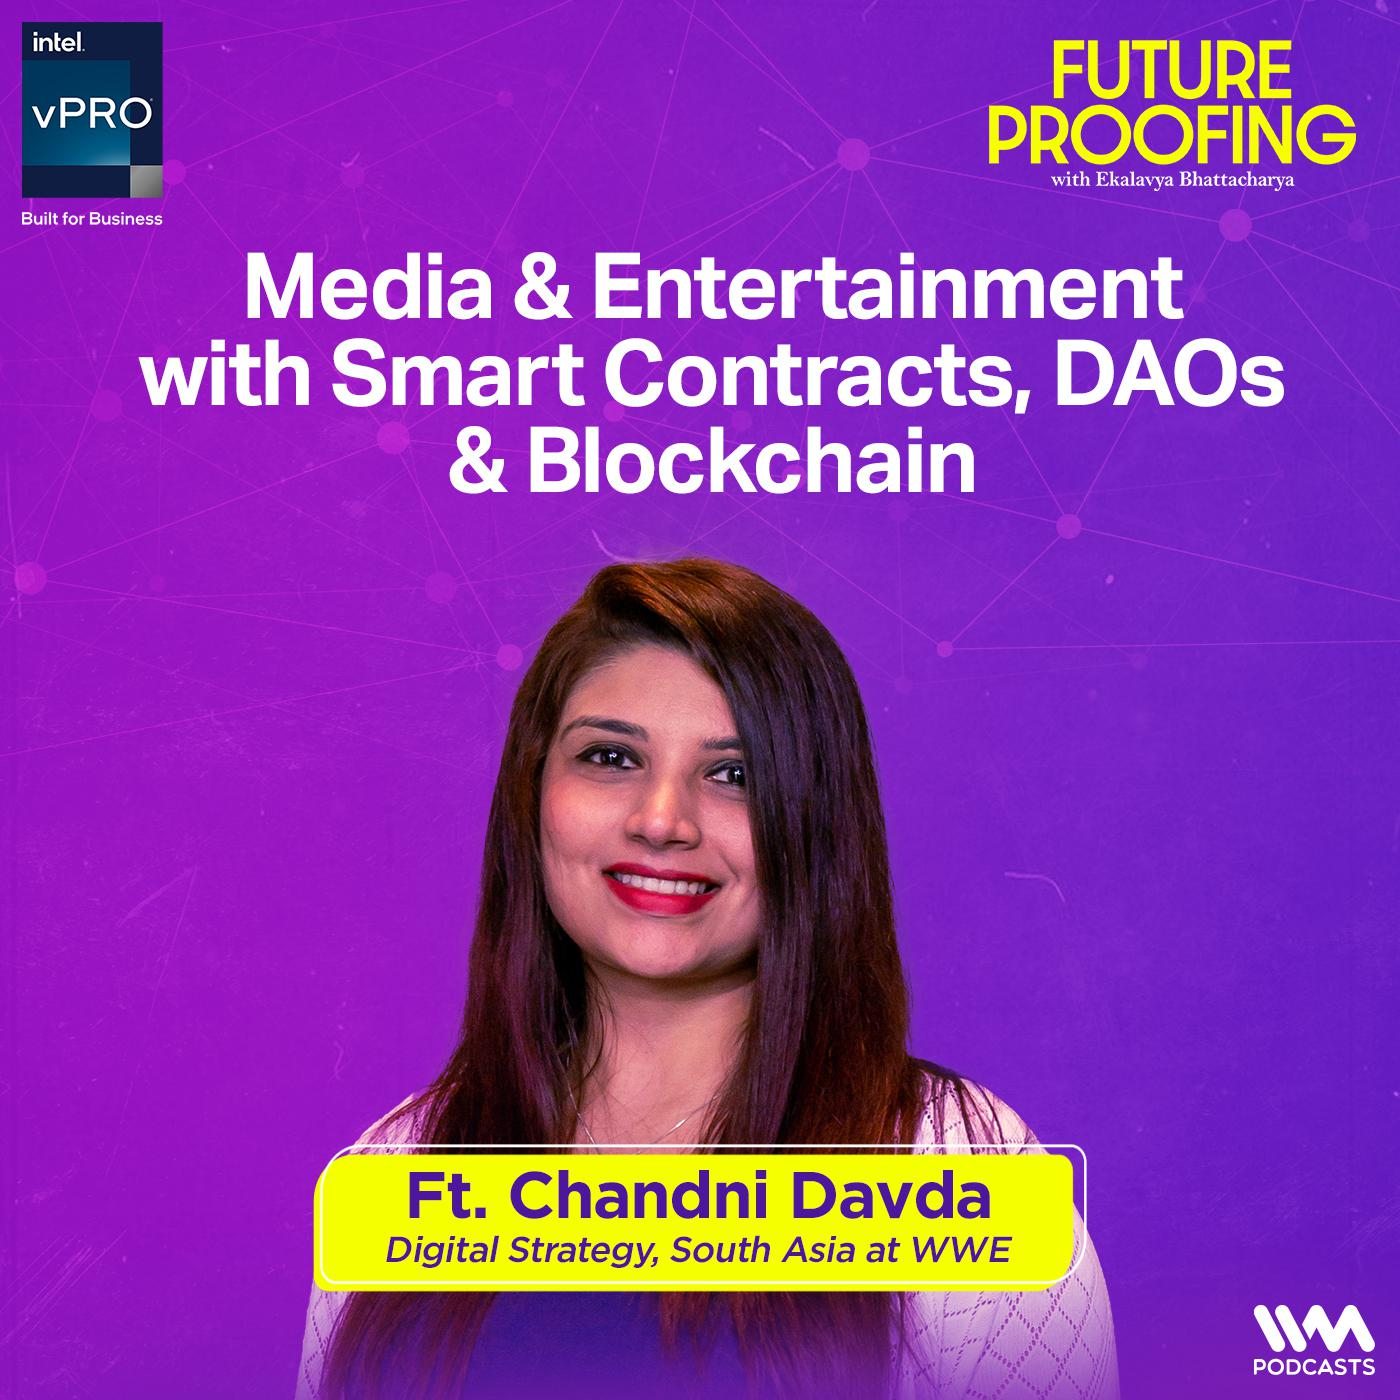 Media & Entertainment with Smart Contracts, DAOs & Blockchain ft. Chandni Davda